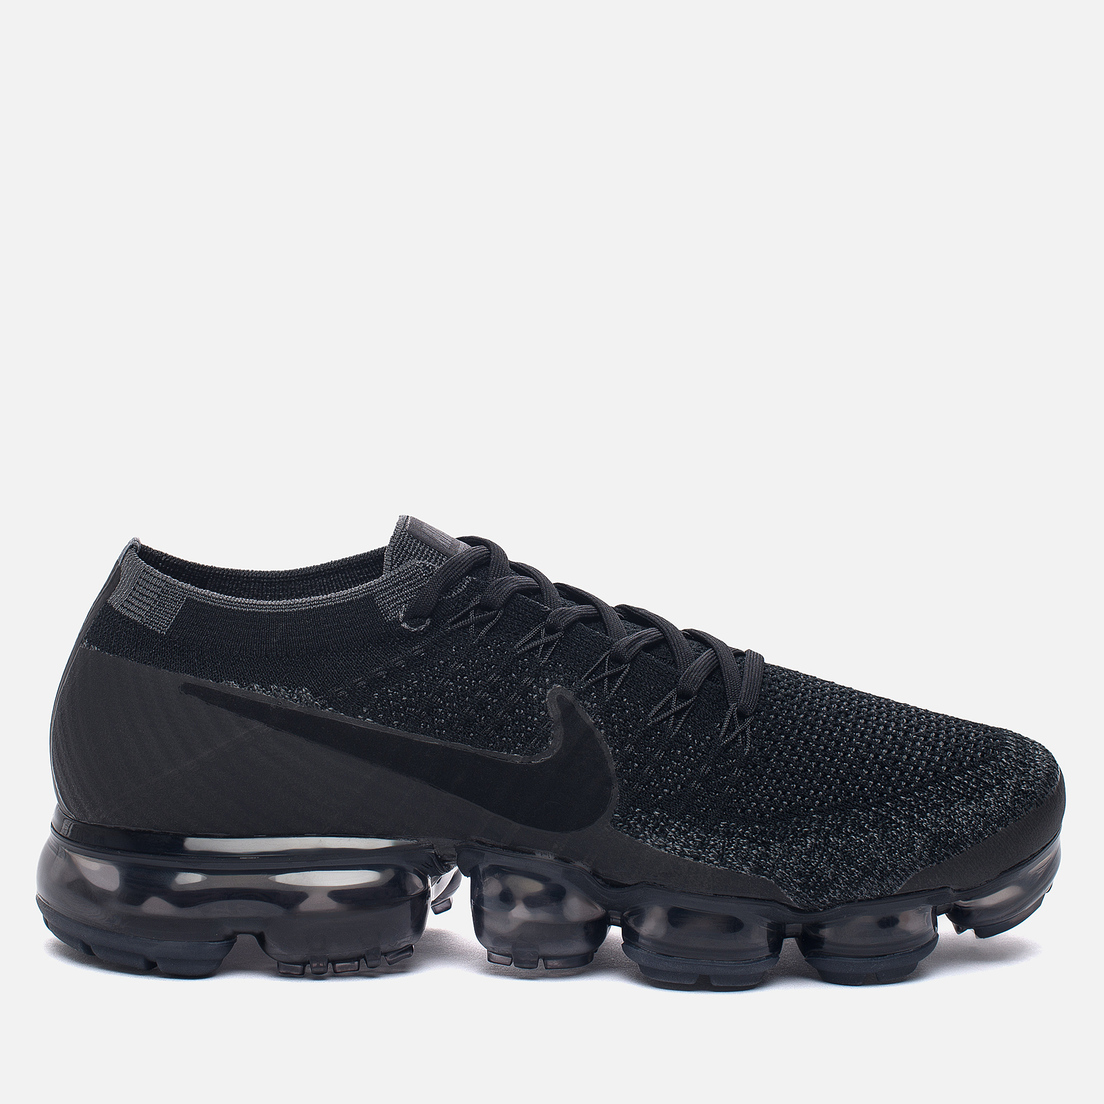 black and white vapormax flyknit